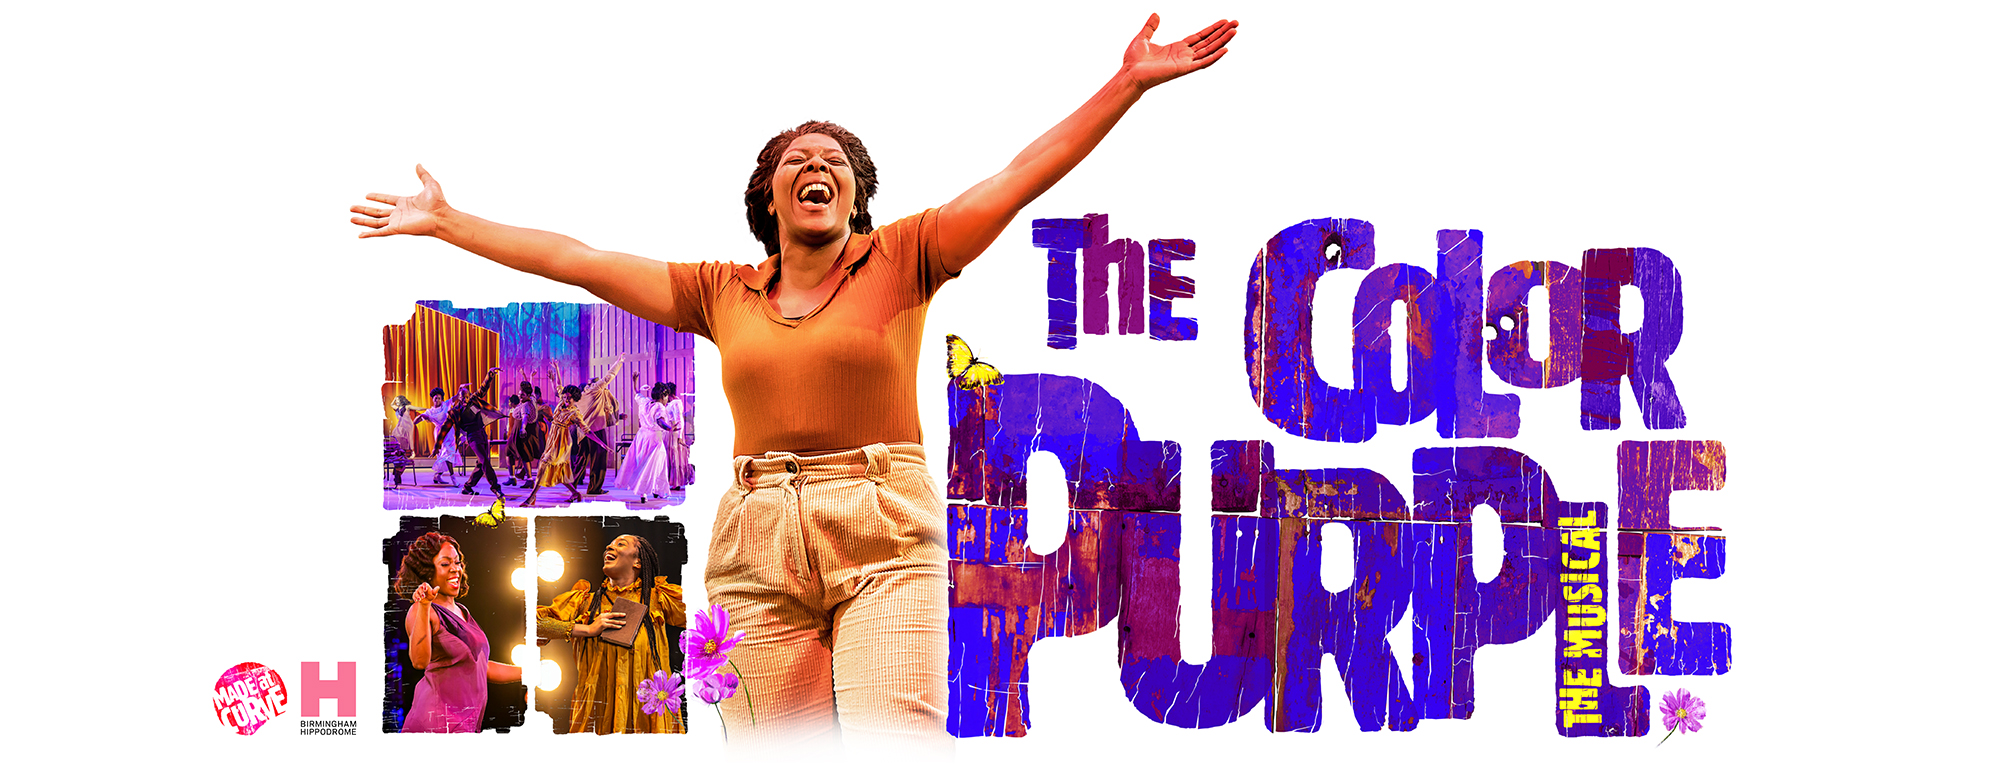 The-Color-Purple_TRP_Header_2000x770